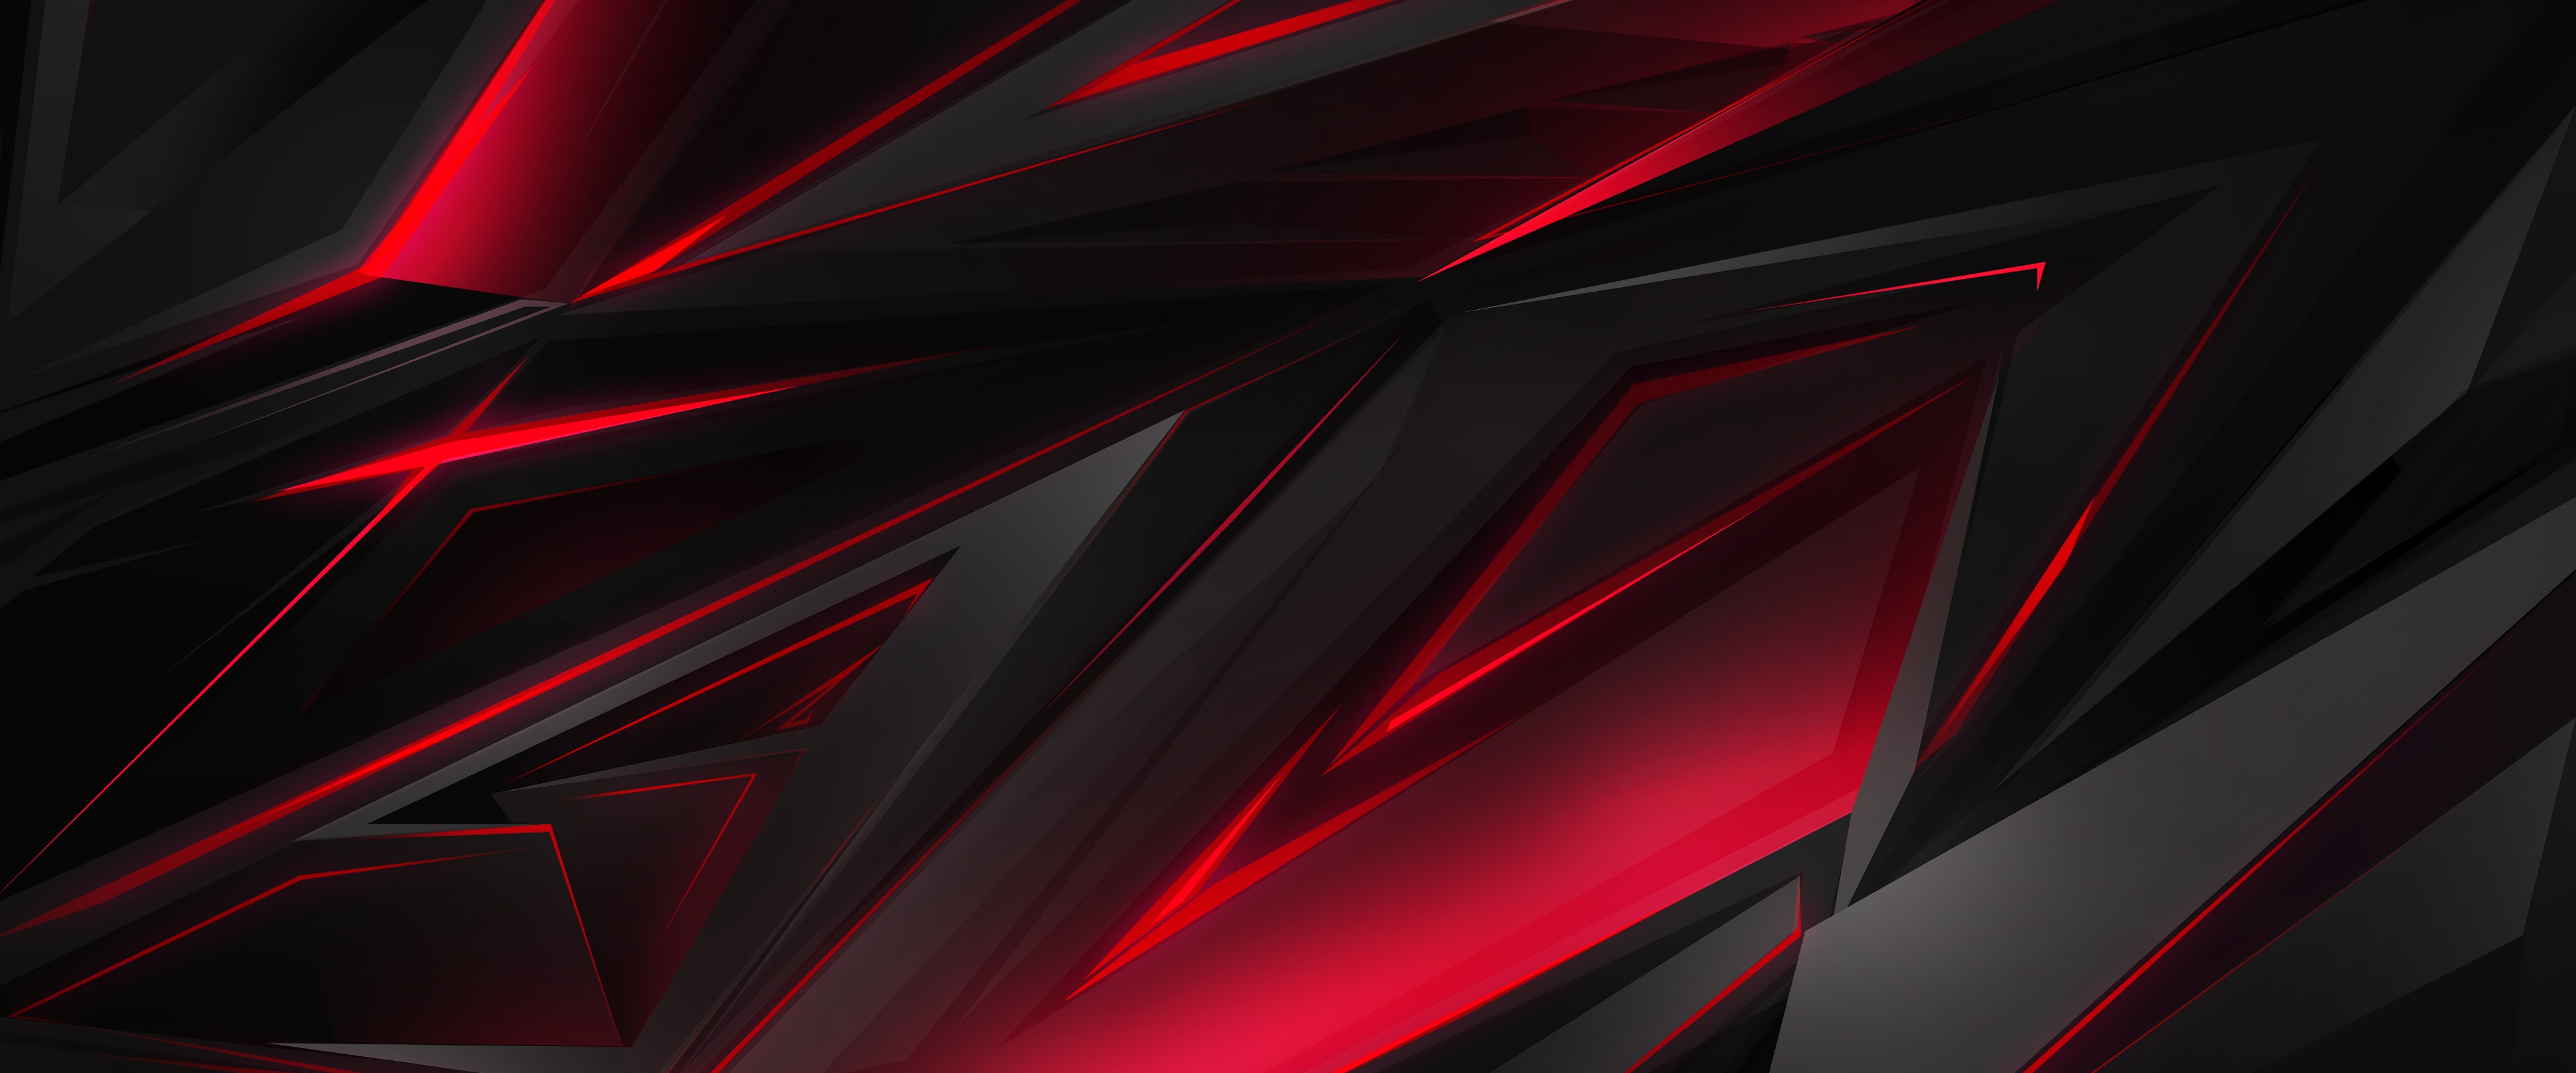 Red And Black Gaming Wallpaper Background Gamer Gaming Wallpaper  Background Image And Wallpaper for Free Download